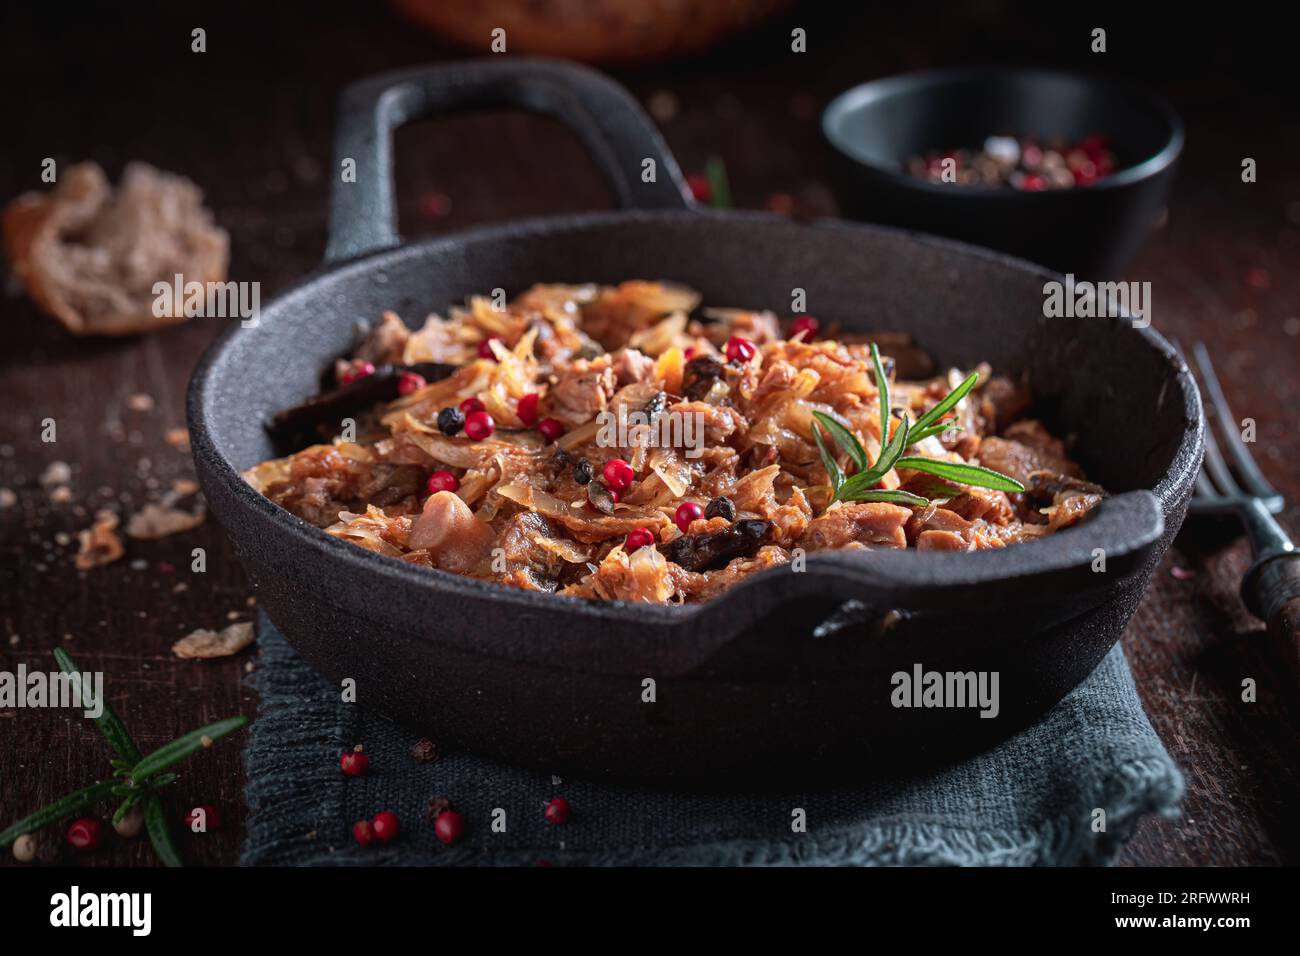 Spicy and homemade stew made of beef and sauerkraut. Bigos is traditional Polish food. Stock Photo